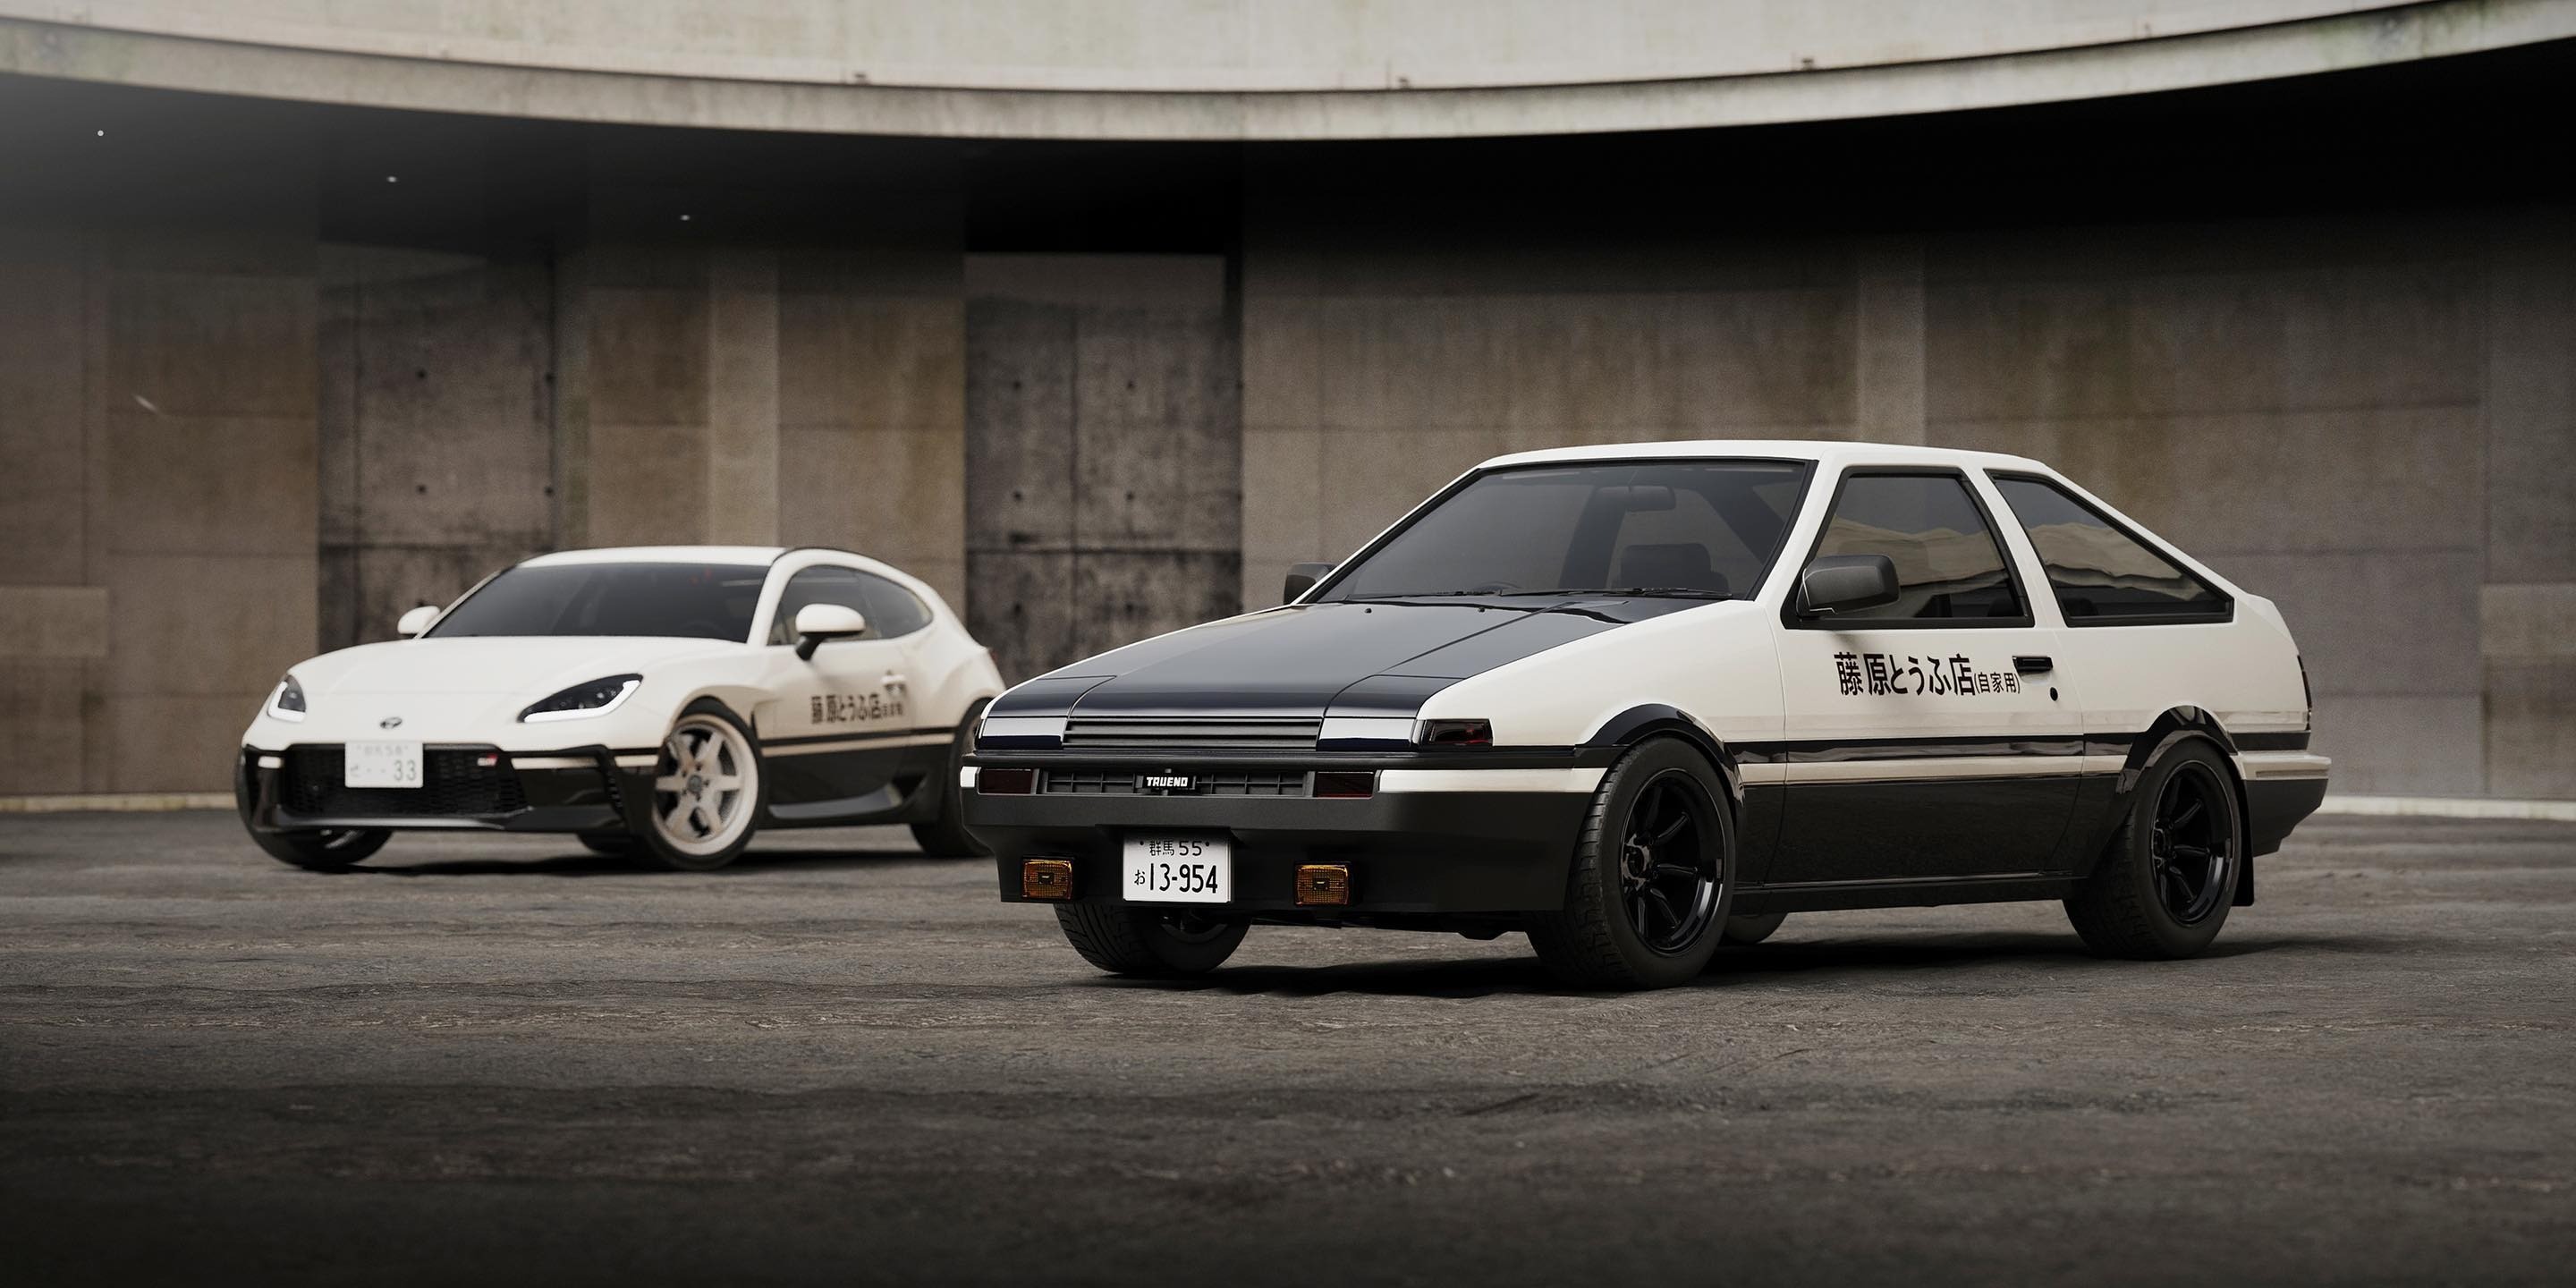 Toyota AE86 Rendering Digitally Resurrects A Legend | peacecommission ...